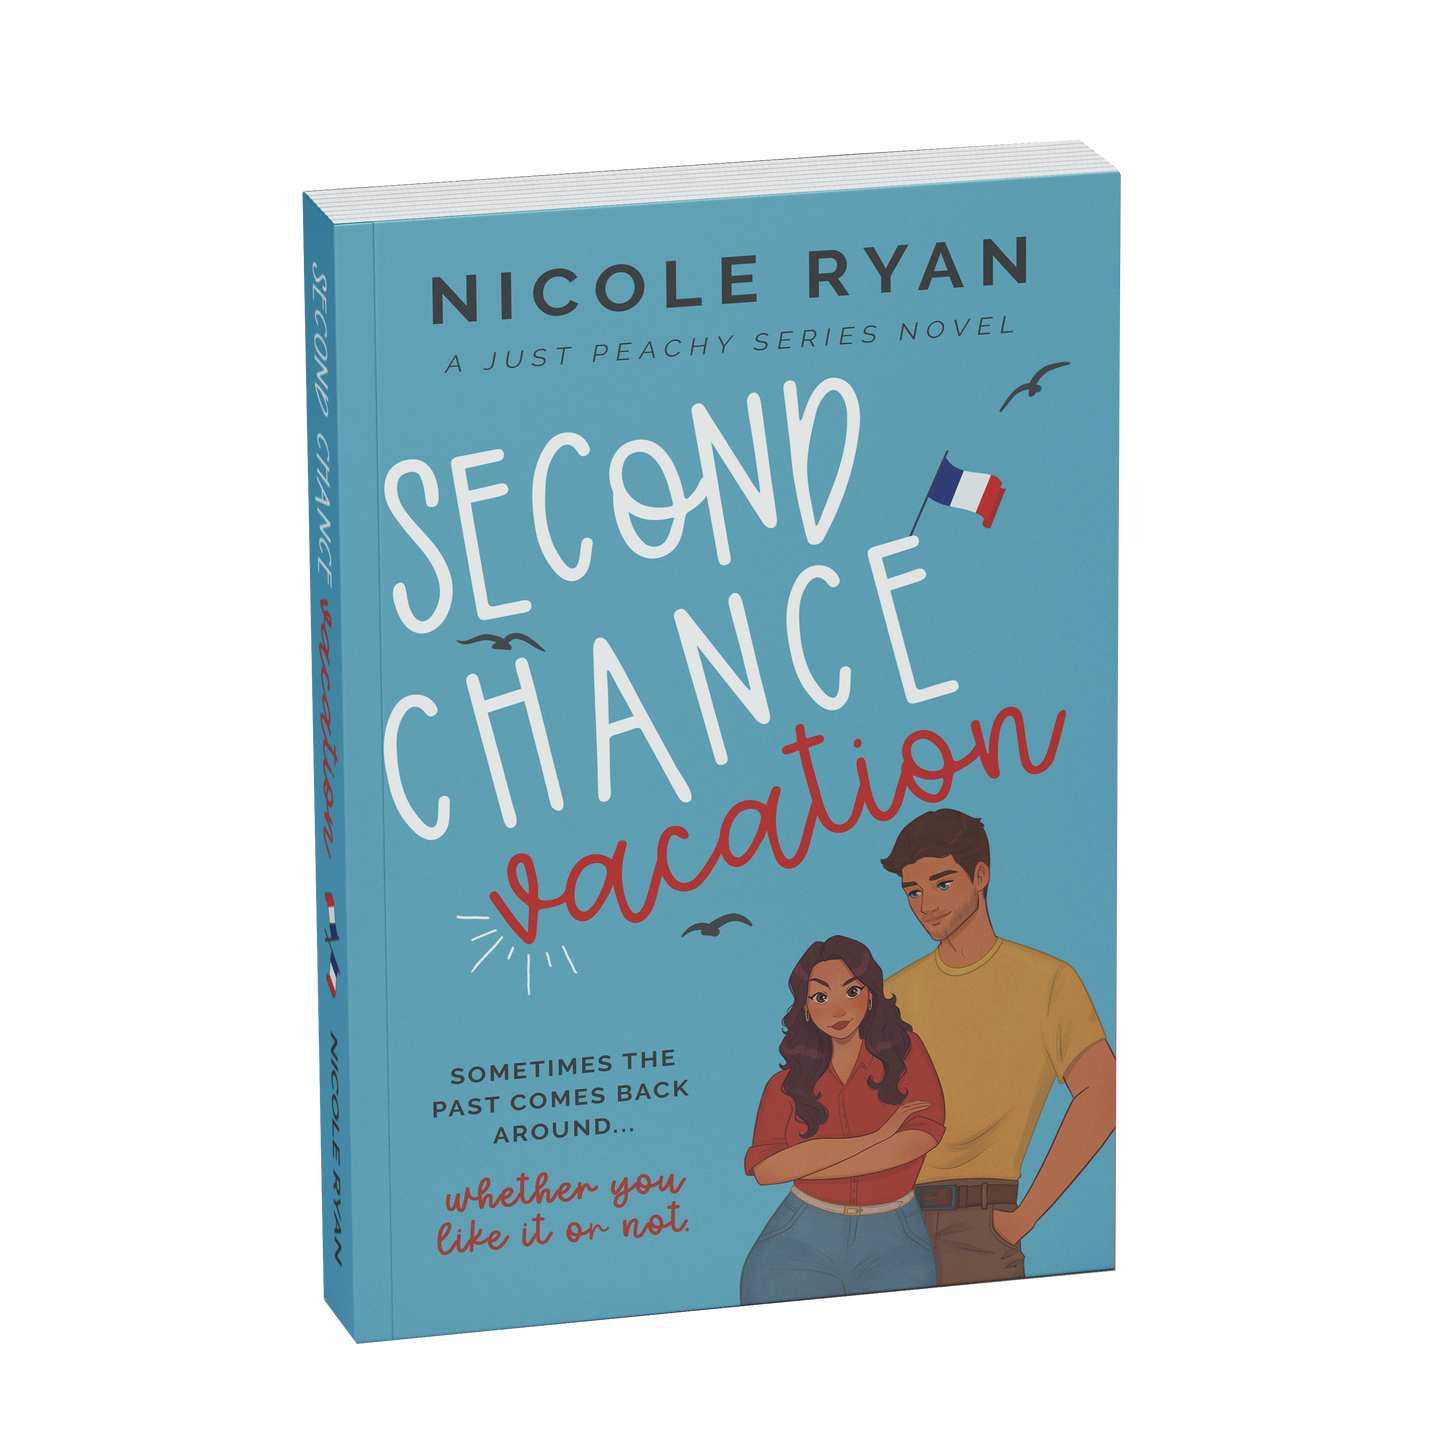 Second Chance Vacation *Signed*